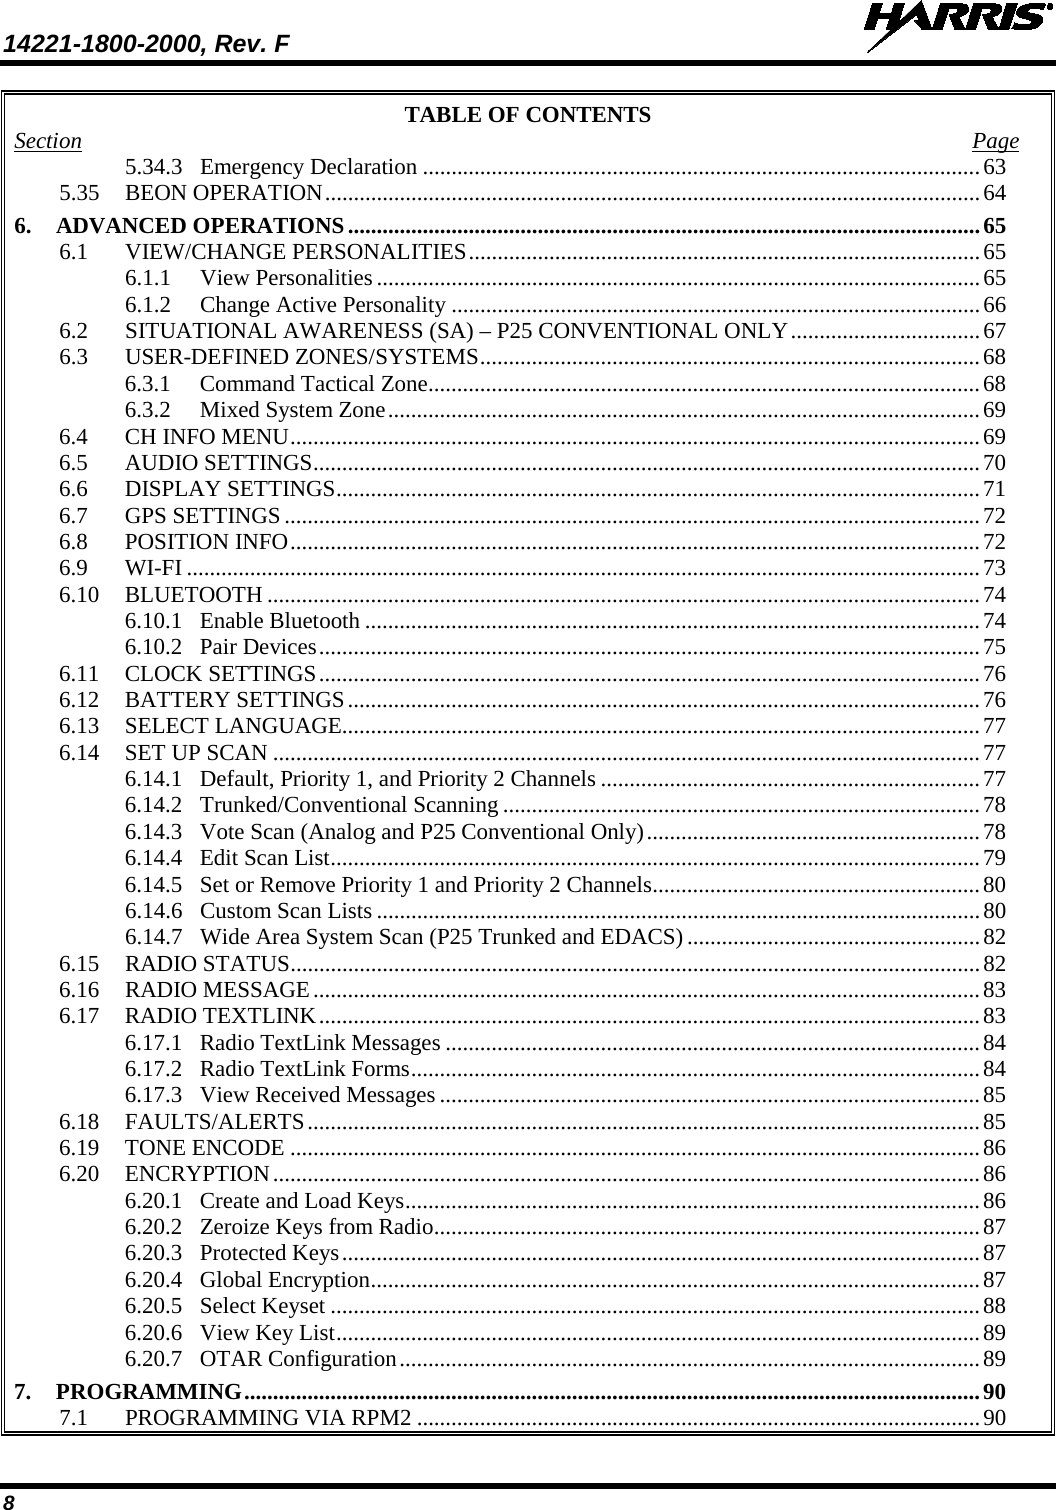 14221-1800-2000, Rev. F   8 TABLE OF CONTENTS Section  Page 5.34.3 Emergency Declaration ................................................................................................. 63 5.35 BEON OPERATION .................................................................................................................. 64 6. ADVANCED OPERATIONS .............................................................................................................. 65 6.1 VIEW/CHANGE PERSONALITIES ......................................................................................... 65 6.1.1 View Personalities ......................................................................................................... 65 6.1.2 Change Active Personality ............................................................................................ 66 6.2 SITUATIONAL AWARENESS (SA) – P25 CONVENTIONAL ONLY ................................. 67 6.3 USER-DEFINED ZONES/SYSTEMS ....................................................................................... 68 6.3.1 Command Tactical Zone ................................................................................................ 68 6.3.2 Mixed System Zone ....................................................................................................... 69 6.4 CH INFO MENU ........................................................................................................................ 69 6.5 AUDIO SETTINGS .................................................................................................................... 70 6.6 DISPLAY SETTINGS ................................................................................................................ 71 6.7 GPS SETTINGS ......................................................................................................................... 72 6.8 POSITION INFO ........................................................................................................................ 72 6.9 WI-FI .......................................................................................................................................... 73 6.10 BLUETOOTH ............................................................................................................................ 74 6.10.1 Enable Bluetooth ........................................................................................................... 74 6.10.2 Pair Devices ................................................................................................................... 75 6.11 CLOCK SETTINGS ................................................................................................................... 76 6.12 BATTERY SETTINGS .............................................................................................................. 76 6.13 SELECT LANGUAGE............................................................................................................... 77 6.14 SET UP SCAN ........................................................................................................................... 77 6.14.1 Default, Priority 1, and Priority 2 Channels .................................................................. 77 6.14.2 Trunked/Conventional Scanning ................................................................................... 78 6.14.3 Vote Scan (Analog and P25 Conventional Only) .......................................................... 78 6.14.4 Edit Scan List ................................................................................................................. 79 6.14.5 Set or Remove Priority 1 and Priority 2 Channels ......................................................... 80 6.14.6 Custom Scan Lists ......................................................................................................... 80 6.14.7 Wide Area System Scan (P25 Trunked and EDACS) ................................................... 82 6.15 RADIO STATUS ........................................................................................................................ 82 6.16 RADIO MESSAGE .................................................................................................................... 83 6.17 RADIO TEXTLINK ................................................................................................................... 83 6.17.1 Radio TextLink Messages ............................................................................................. 84 6.17.2 Radio TextLink Forms ................................................................................................... 84 6.17.3 View Received Messages .............................................................................................. 85 6.18 FAULTS/ALERTS ..................................................................................................................... 85 6.19 TONE ENCODE ........................................................................................................................ 86 6.20 ENCRYPTION ........................................................................................................................... 86 6.20.1 Create and Load Keys .................................................................................................... 86 6.20.2 Zeroize Keys from Radio ............................................................................................... 87 6.20.3 Protected Keys ............................................................................................................... 87 6.20.4 Global Encryption .......................................................................................................... 87 6.20.5 Select Keyset ................................................................................................................. 88 6.20.6 View Key List ................................................................................................................ 89 6.20.7 OTAR Configuration ..................................................................................................... 89 7. PROGRAMMING ................................................................................................................................ 90 7.1 PROGRAMMING VIA RPM2 .................................................................................................. 90 